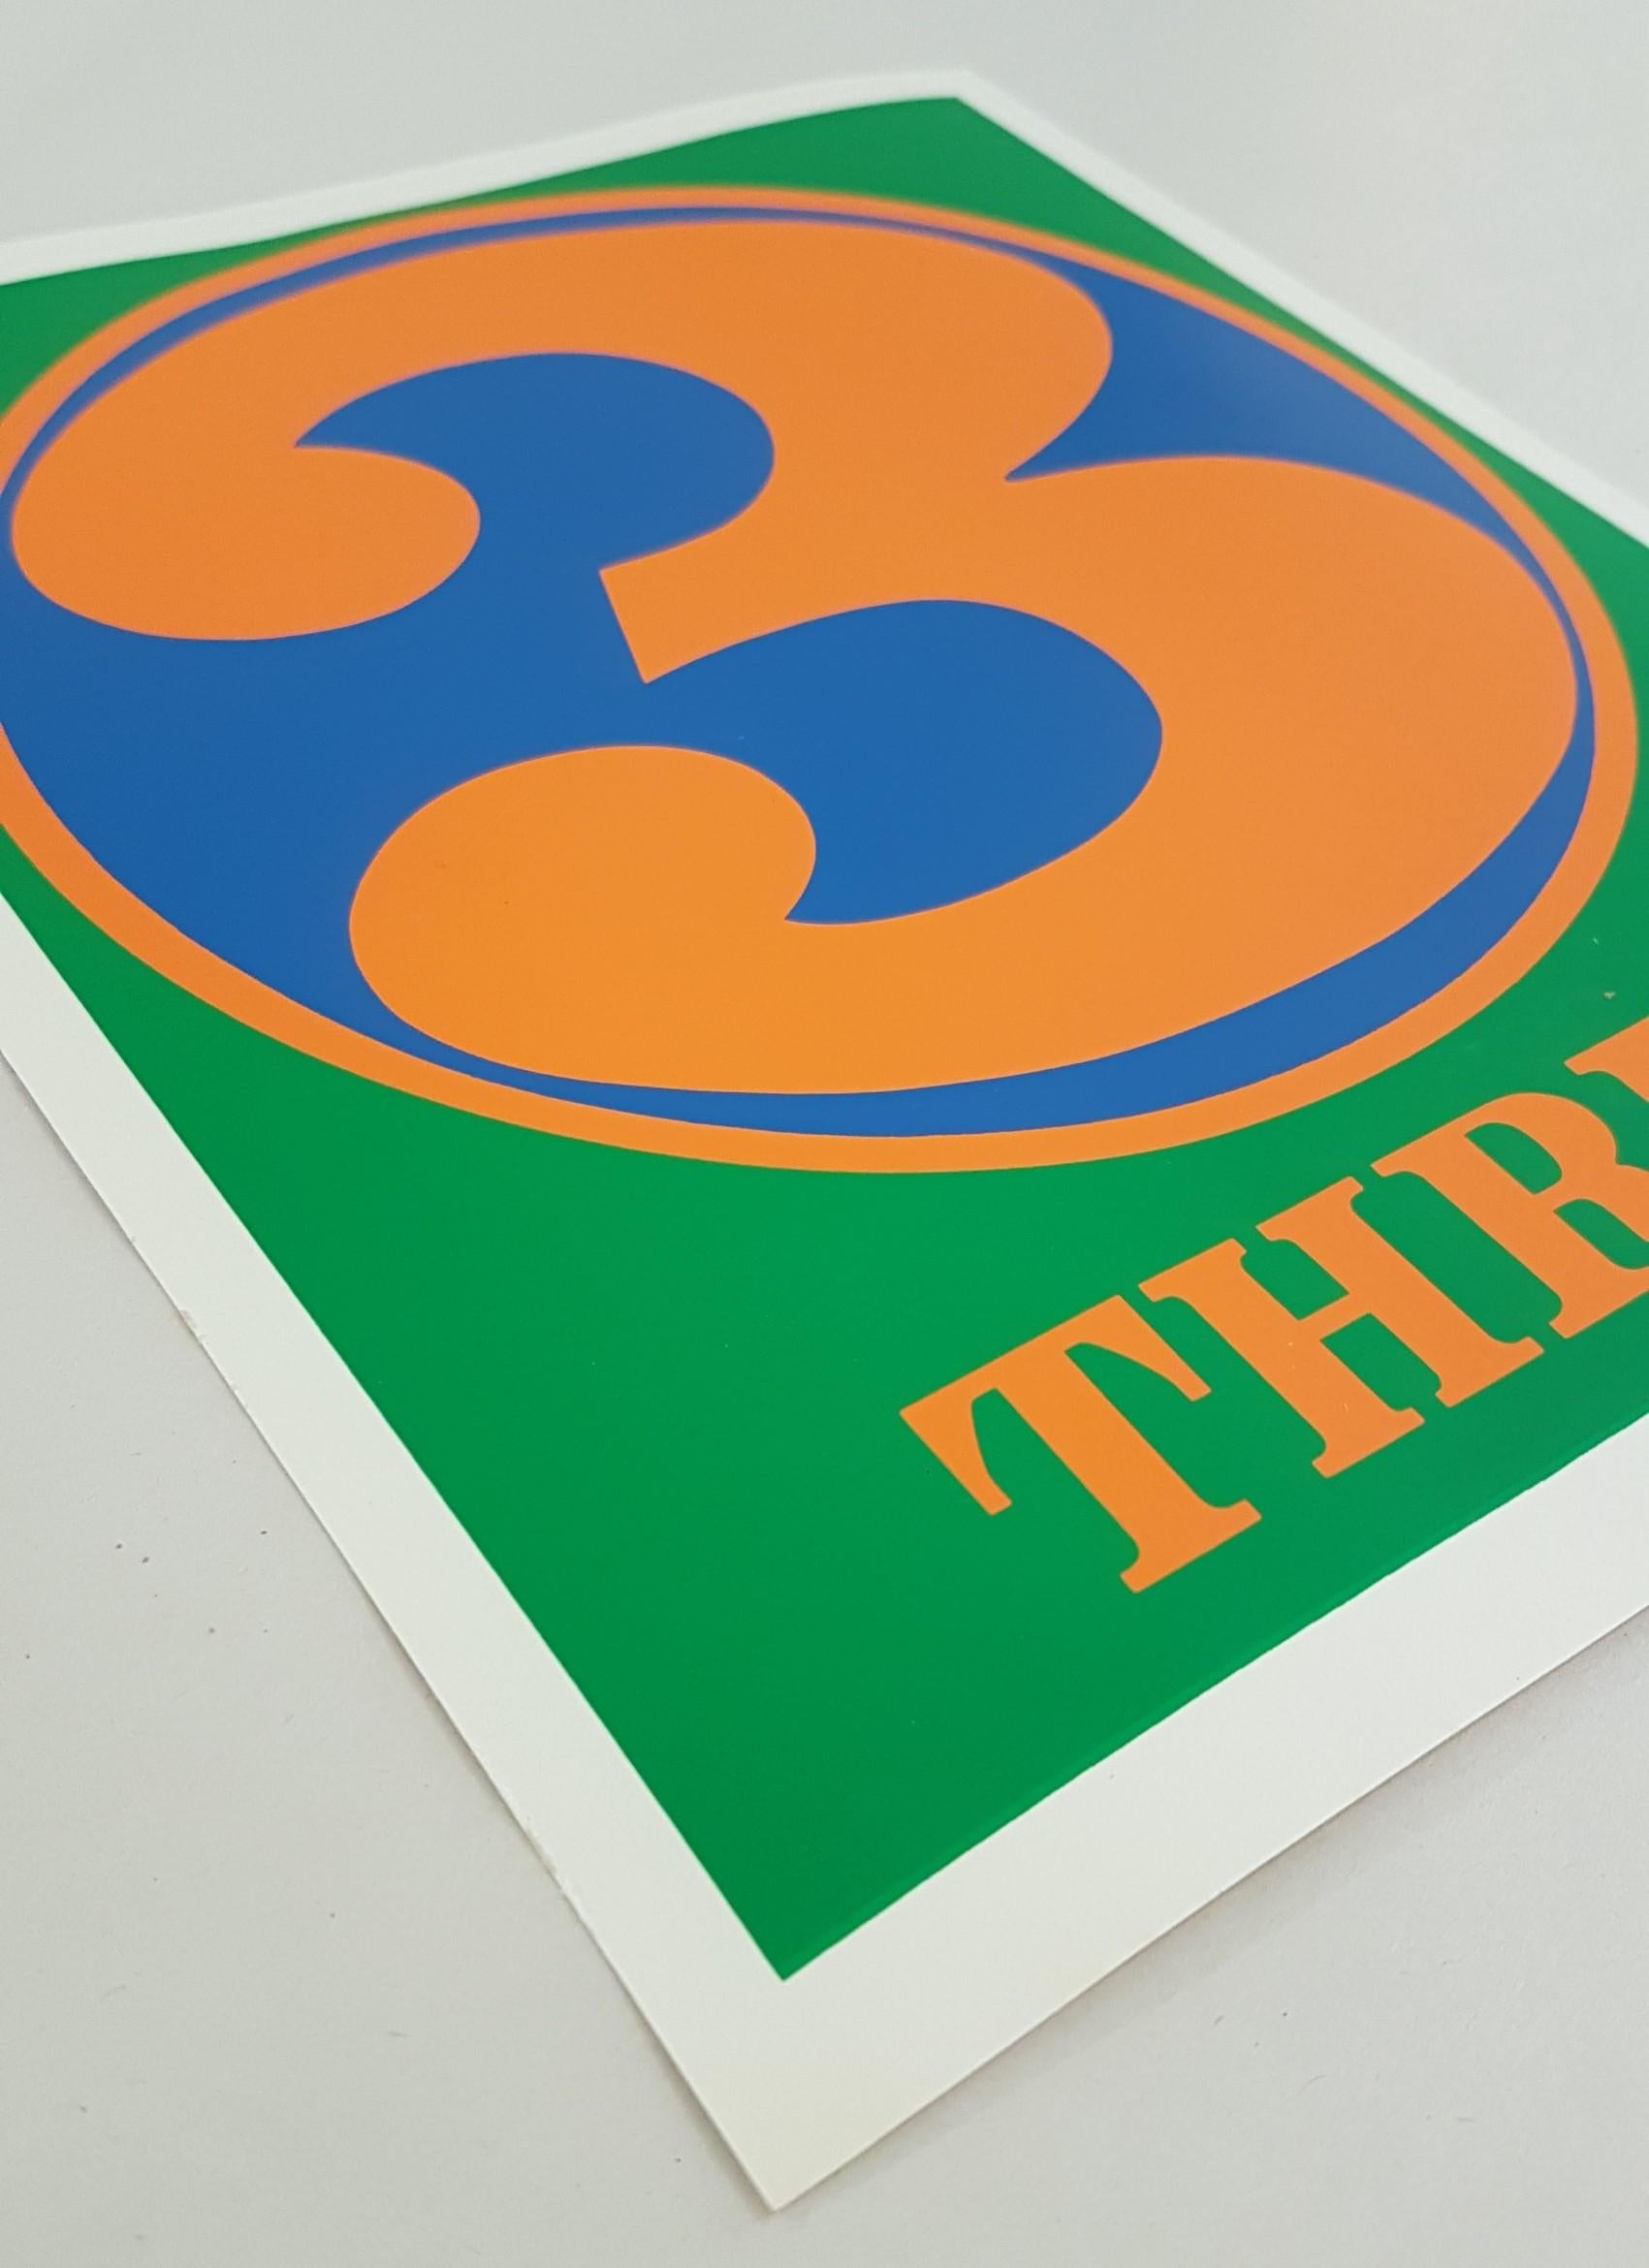 Robert Indiana
Title: NUMBERS Folio - 10 (ten) Loose Silkscreen Prints accompanied by Poems
Folio includes numbers: ONE, TWO, THREE, FOUR, FIVE, SIX, SEVEN, EIGHT, NINE, ZERO
Medium: Silkscreen Prints
Year: 1968
Publisher: Edition Domberger